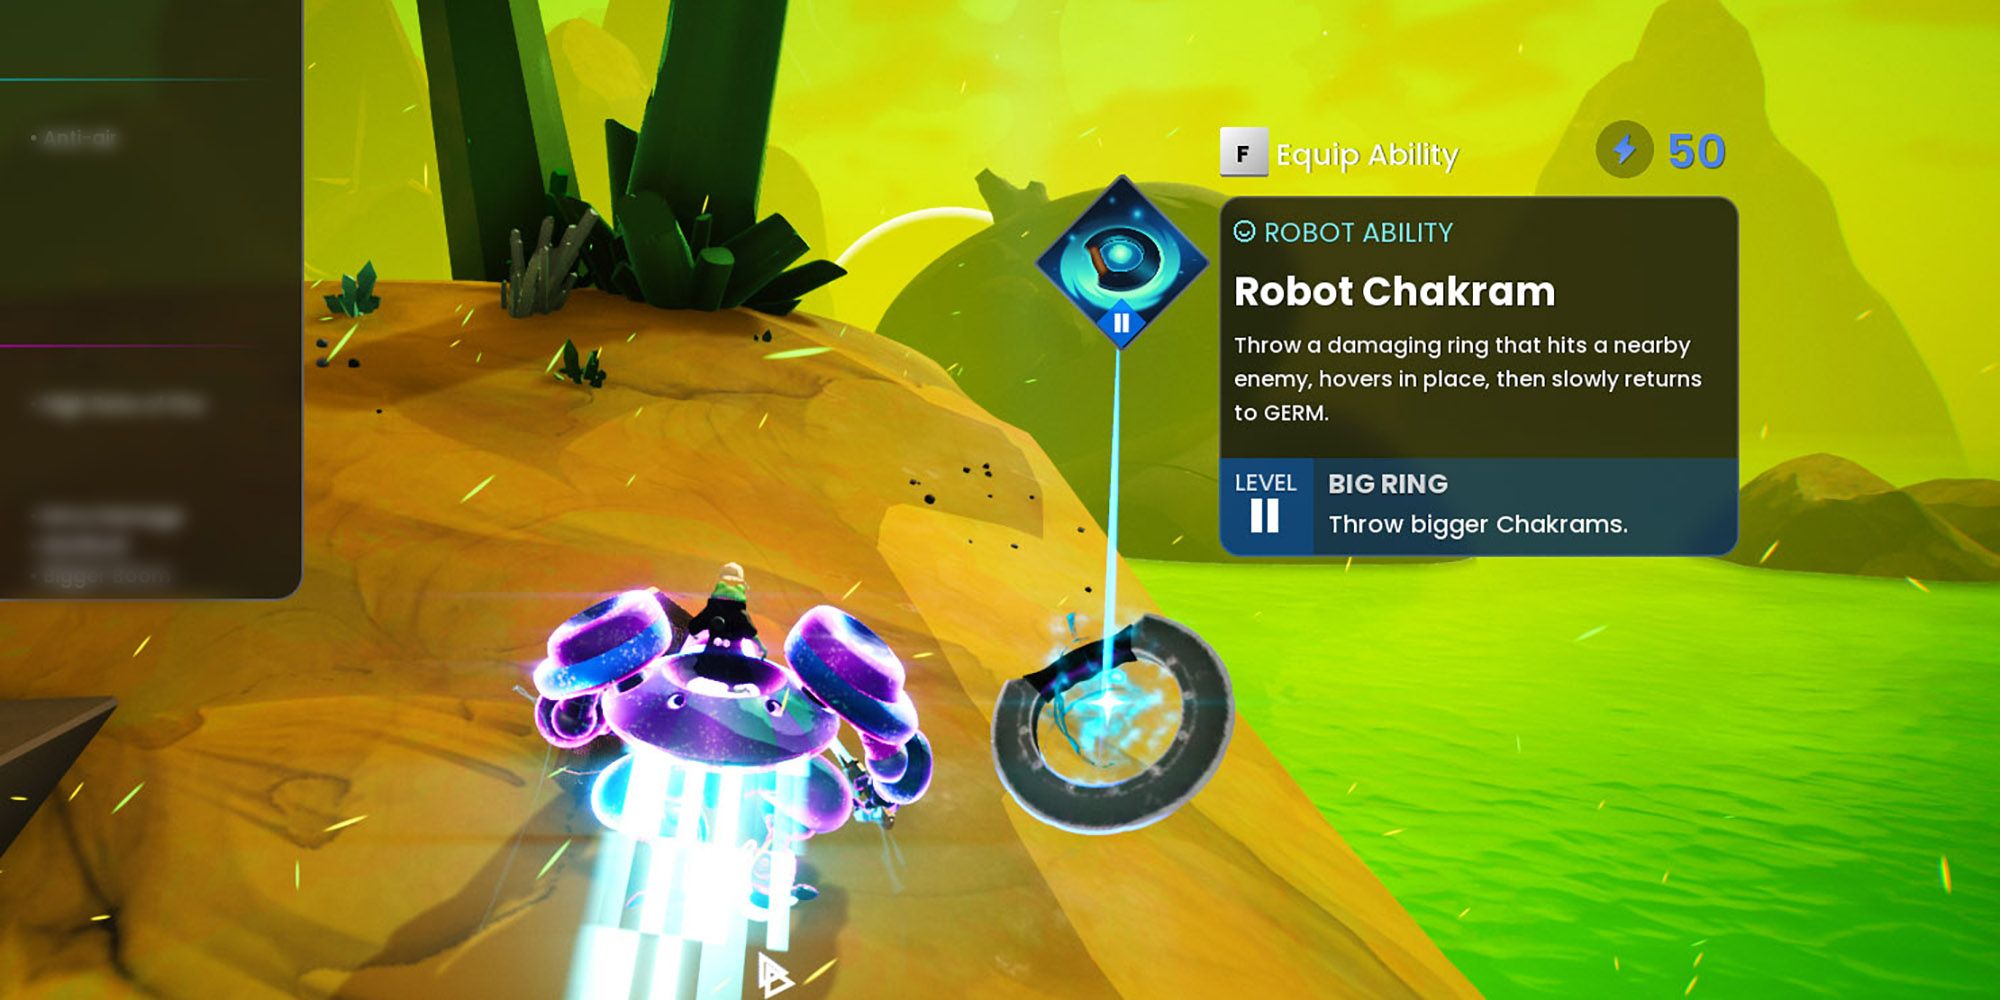 Shoulders Of Giants - Finding Robot Chakram While Searching Level